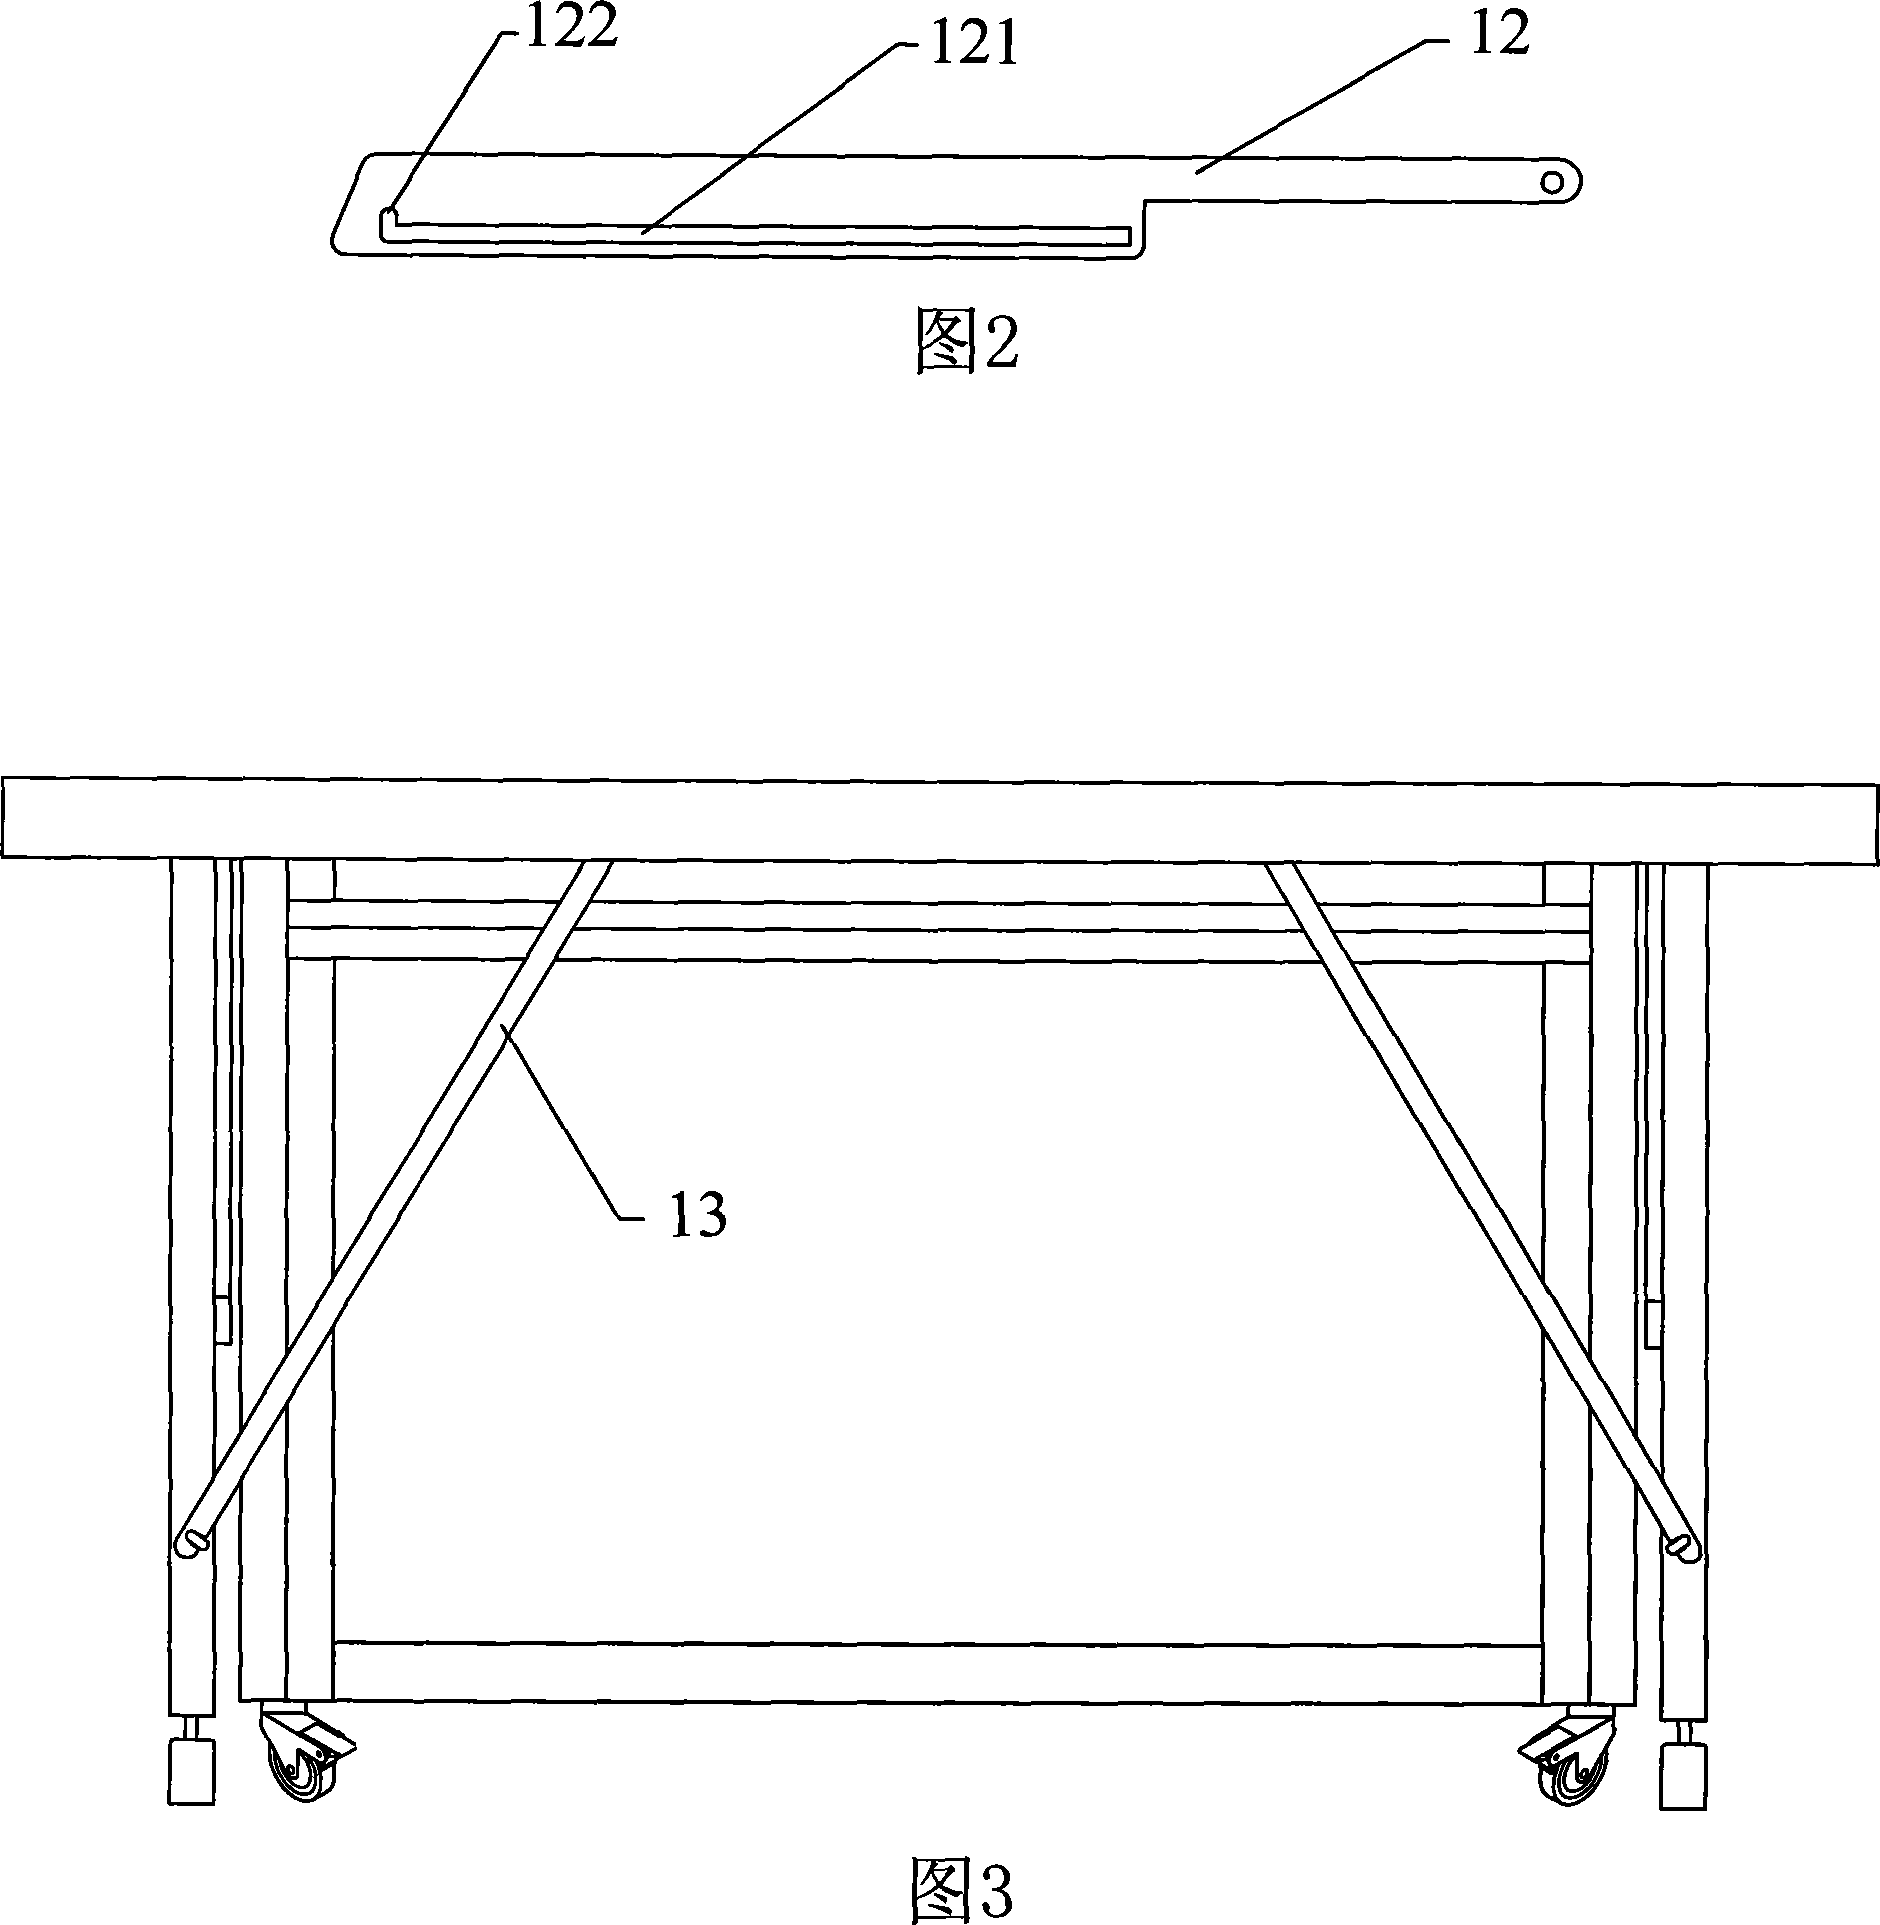 Folding type table tennis table